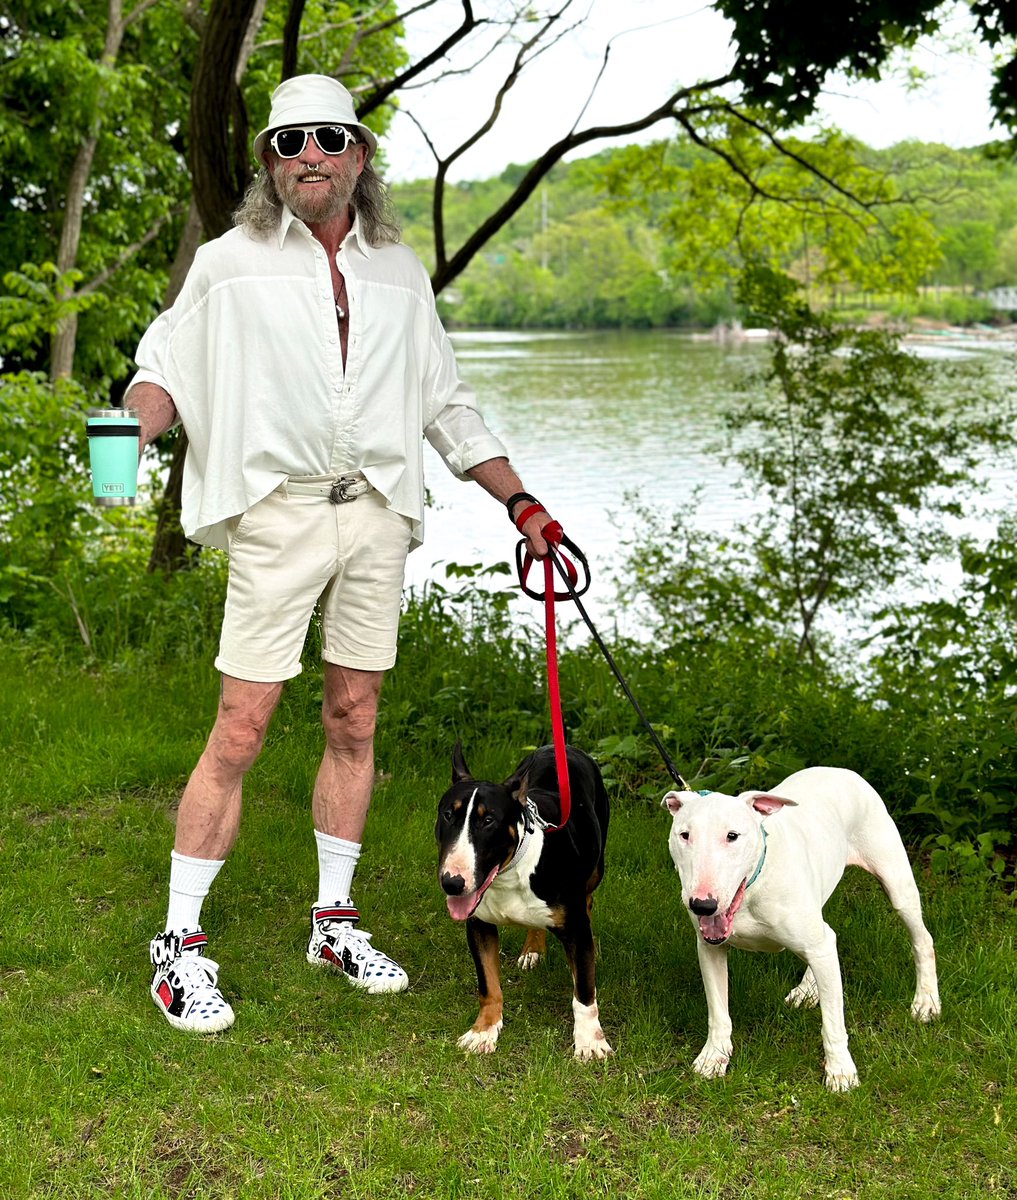 The chaos has subsided some, but it takes both of us to do the morning walk. #YohjiYamamoto shirt #Topman shorts #PierreHardy sneakers #KieselsteinCord belt #ElsaPeretti bottle jug #LouisVuitton “America’s Cup” leather hat #Versace sunglasses